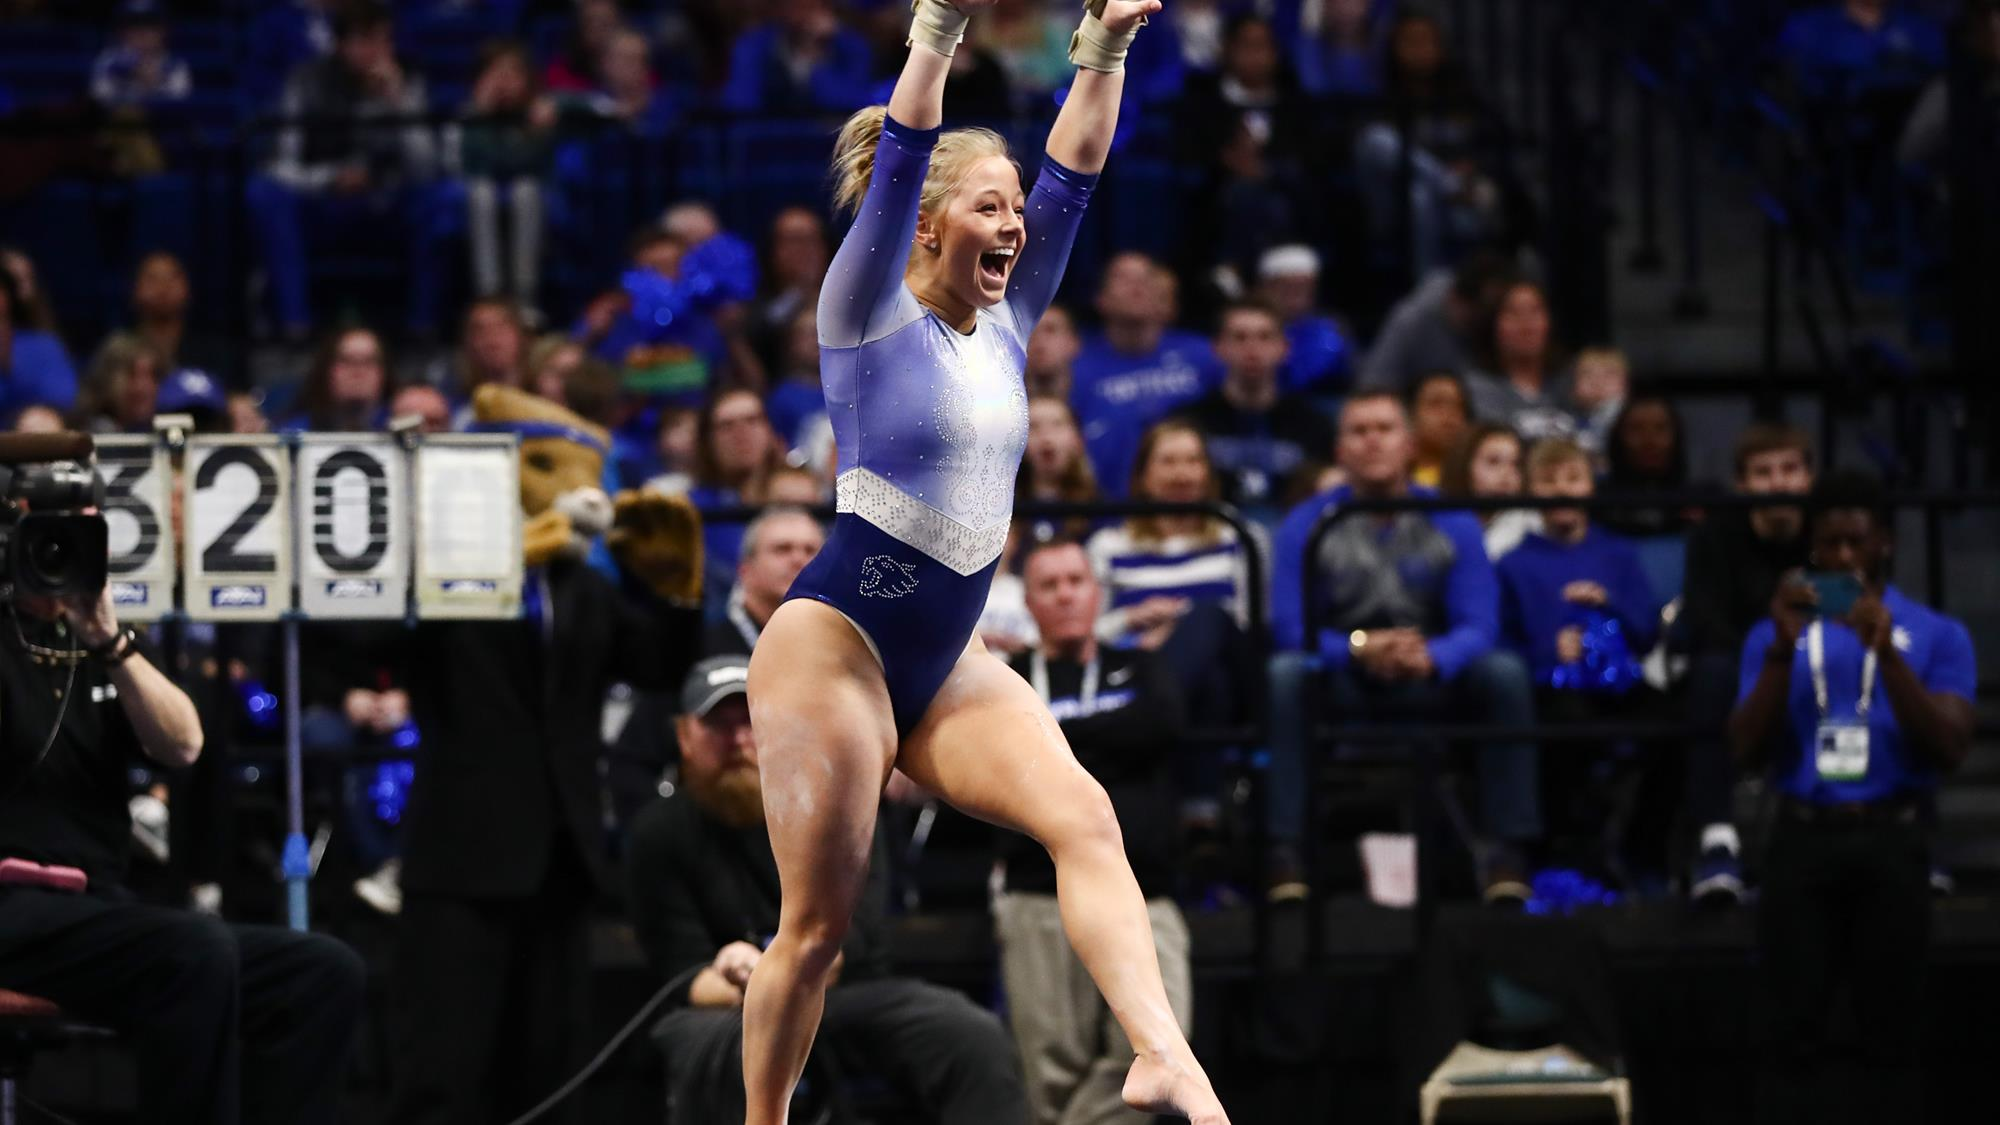 UK Finishes Strong in Front of Record Excite Night Crowd